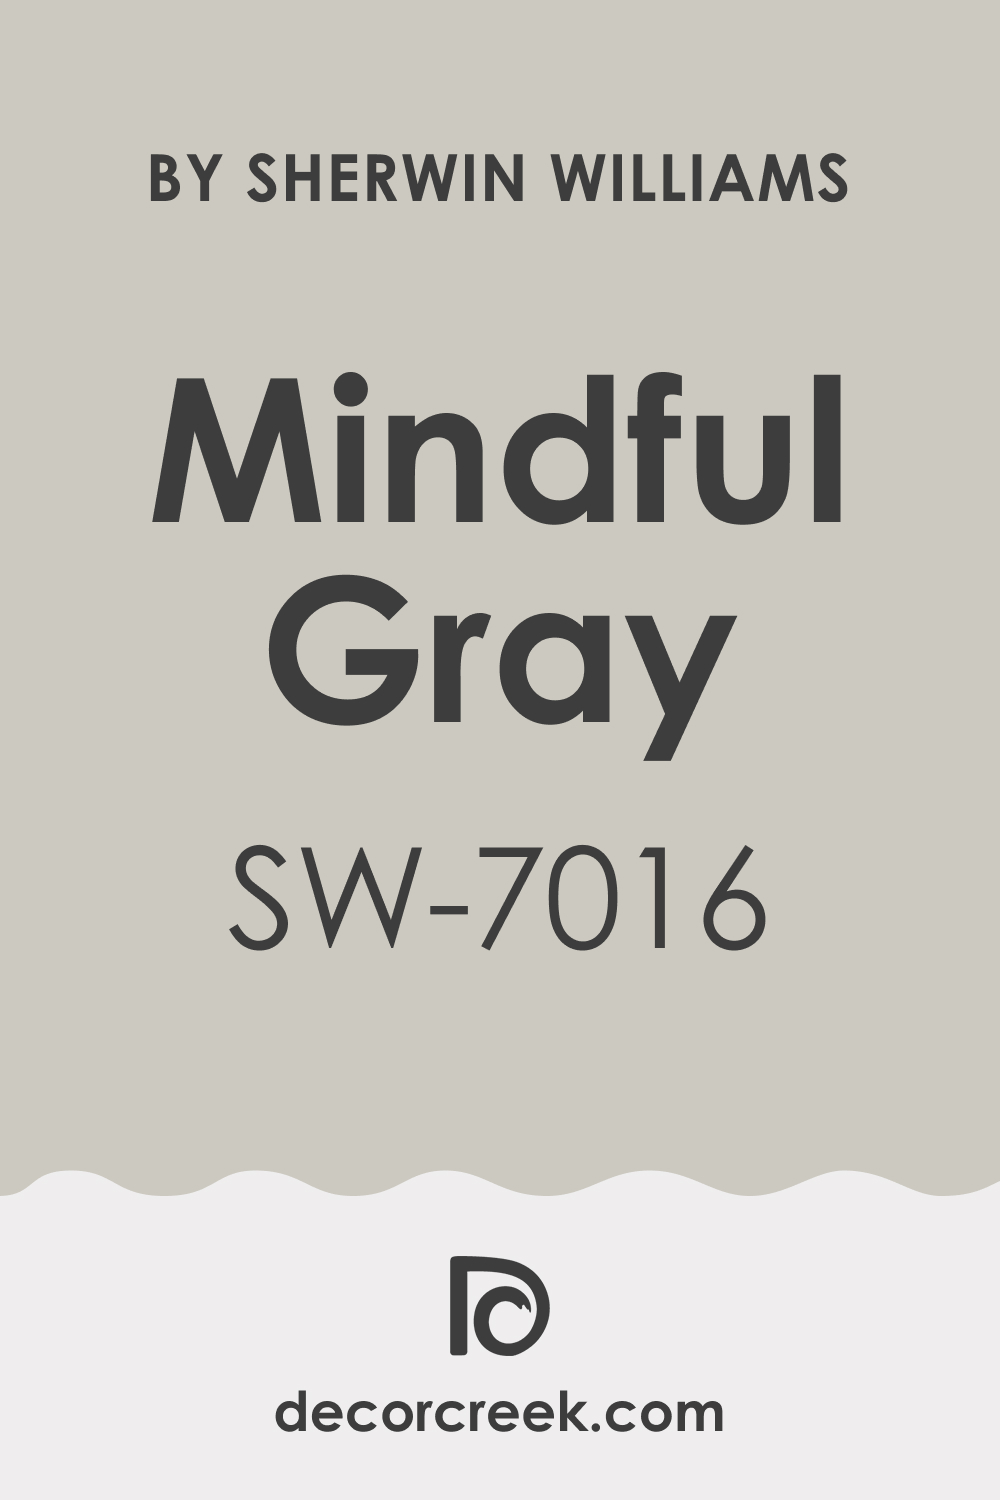 Mindful Gray SW 7016 Paint Color by Sherwin Williams